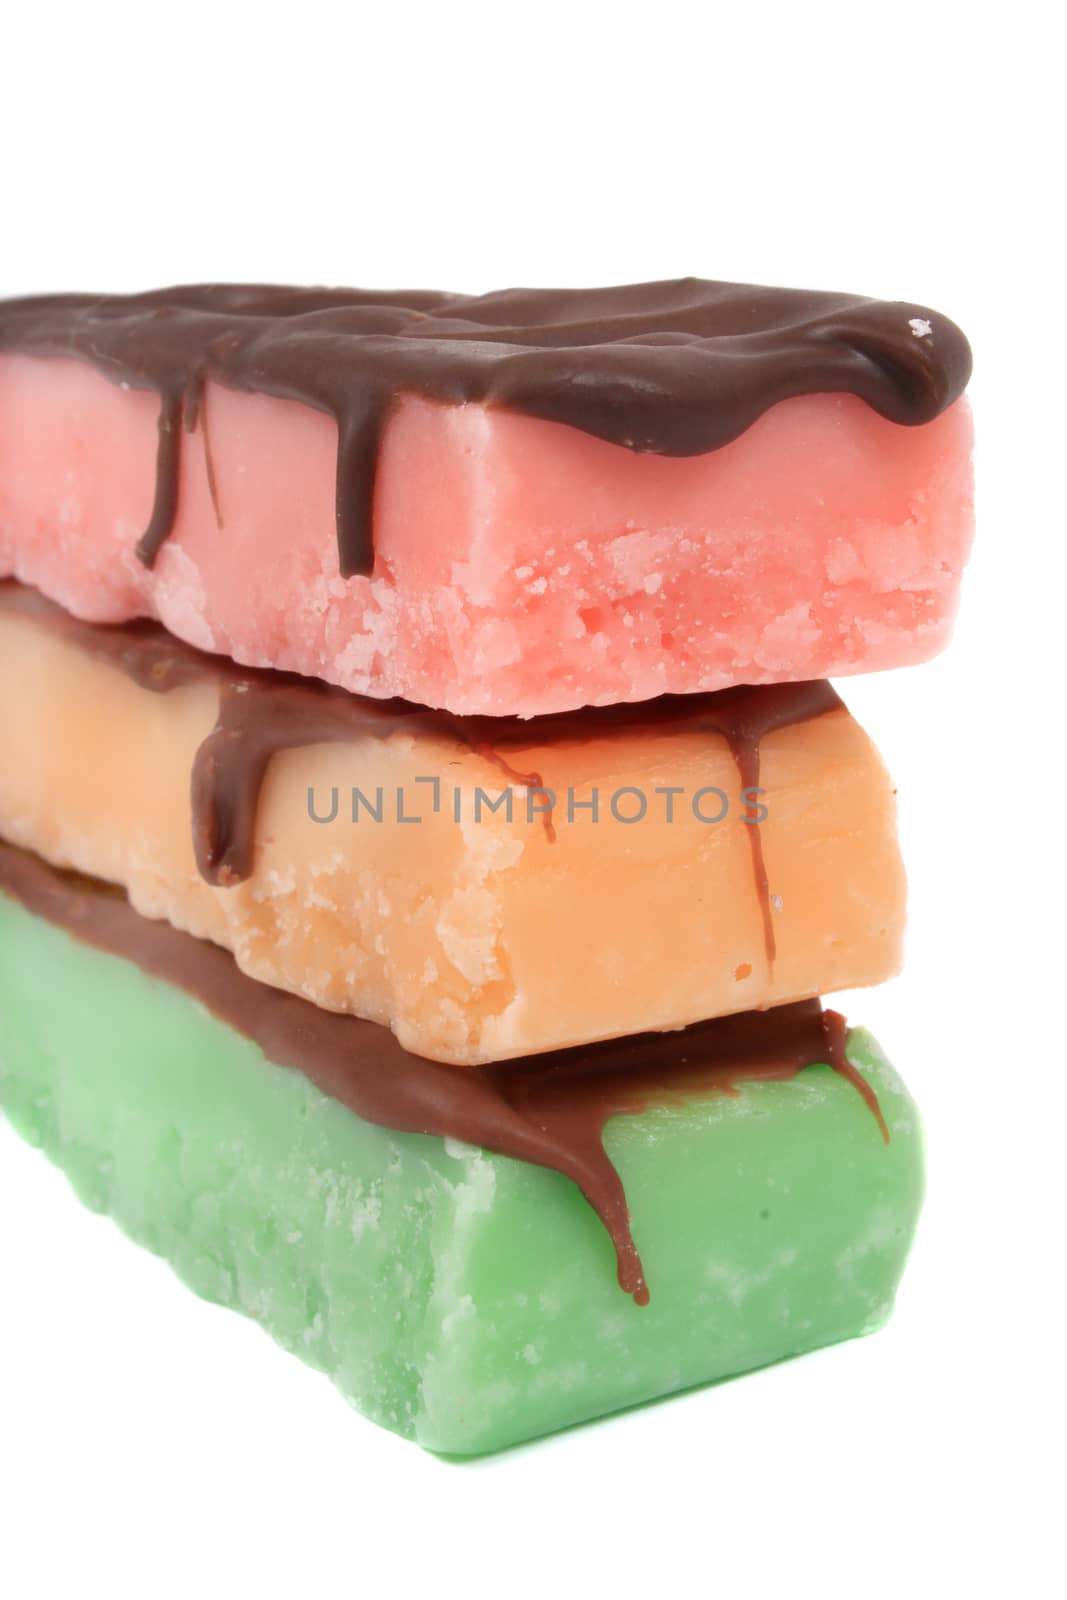 Three fudge bars in three color and flavors like mint, orange and strawberry on a white background